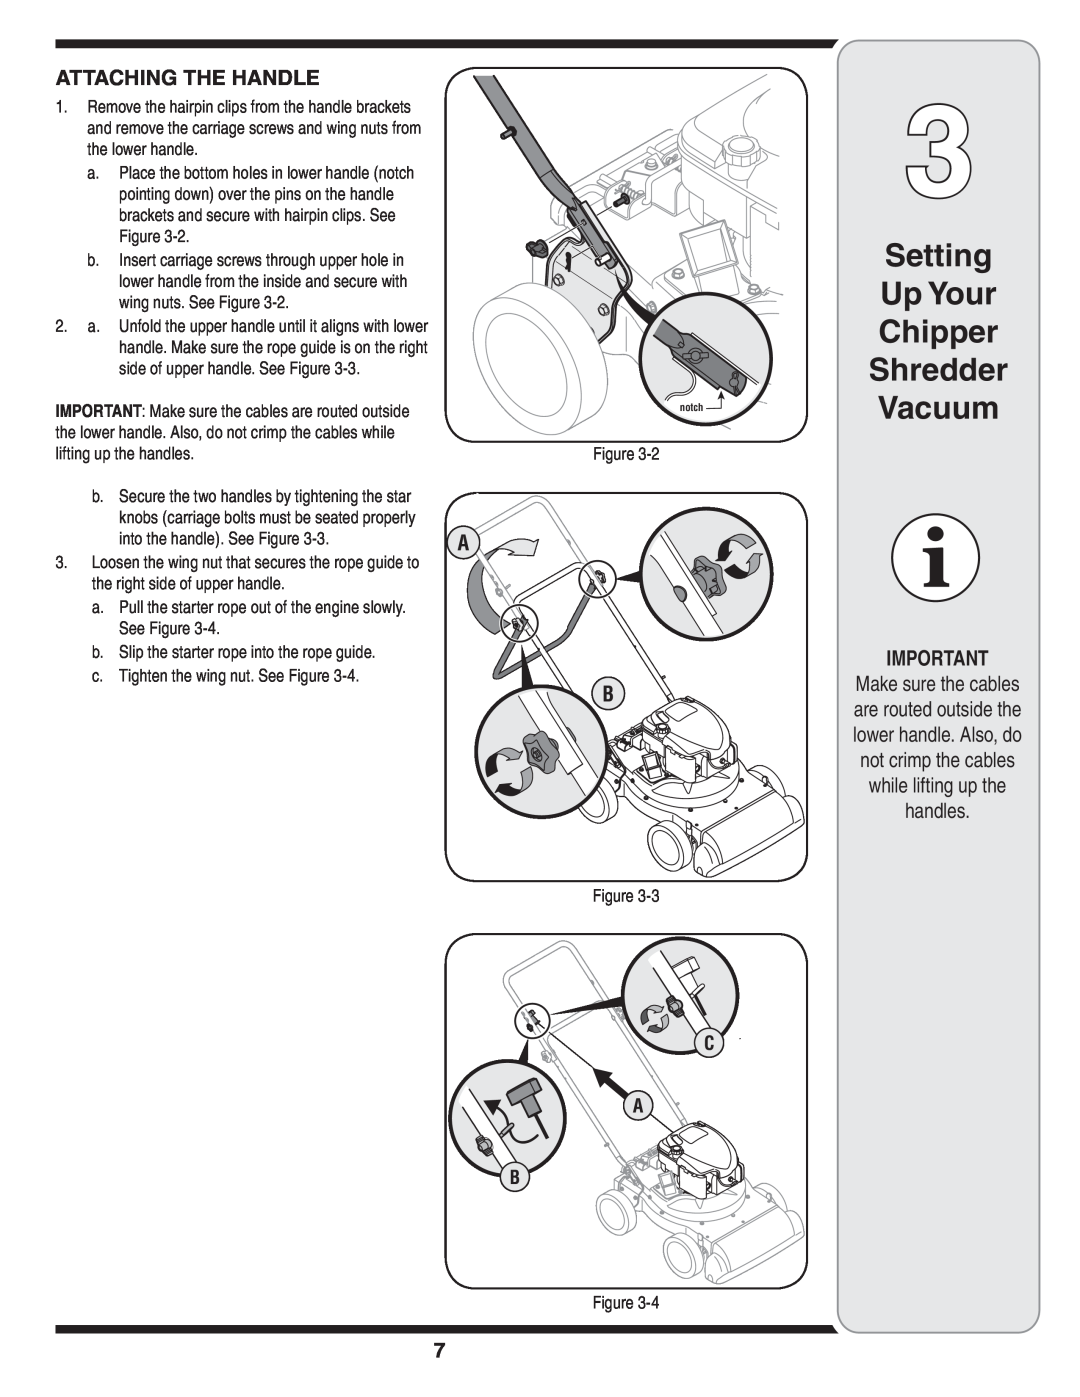 MTD Series 020 warranty Setting Up Your Chipper Shredder Vacuum, Attaching The Handle, C A B 